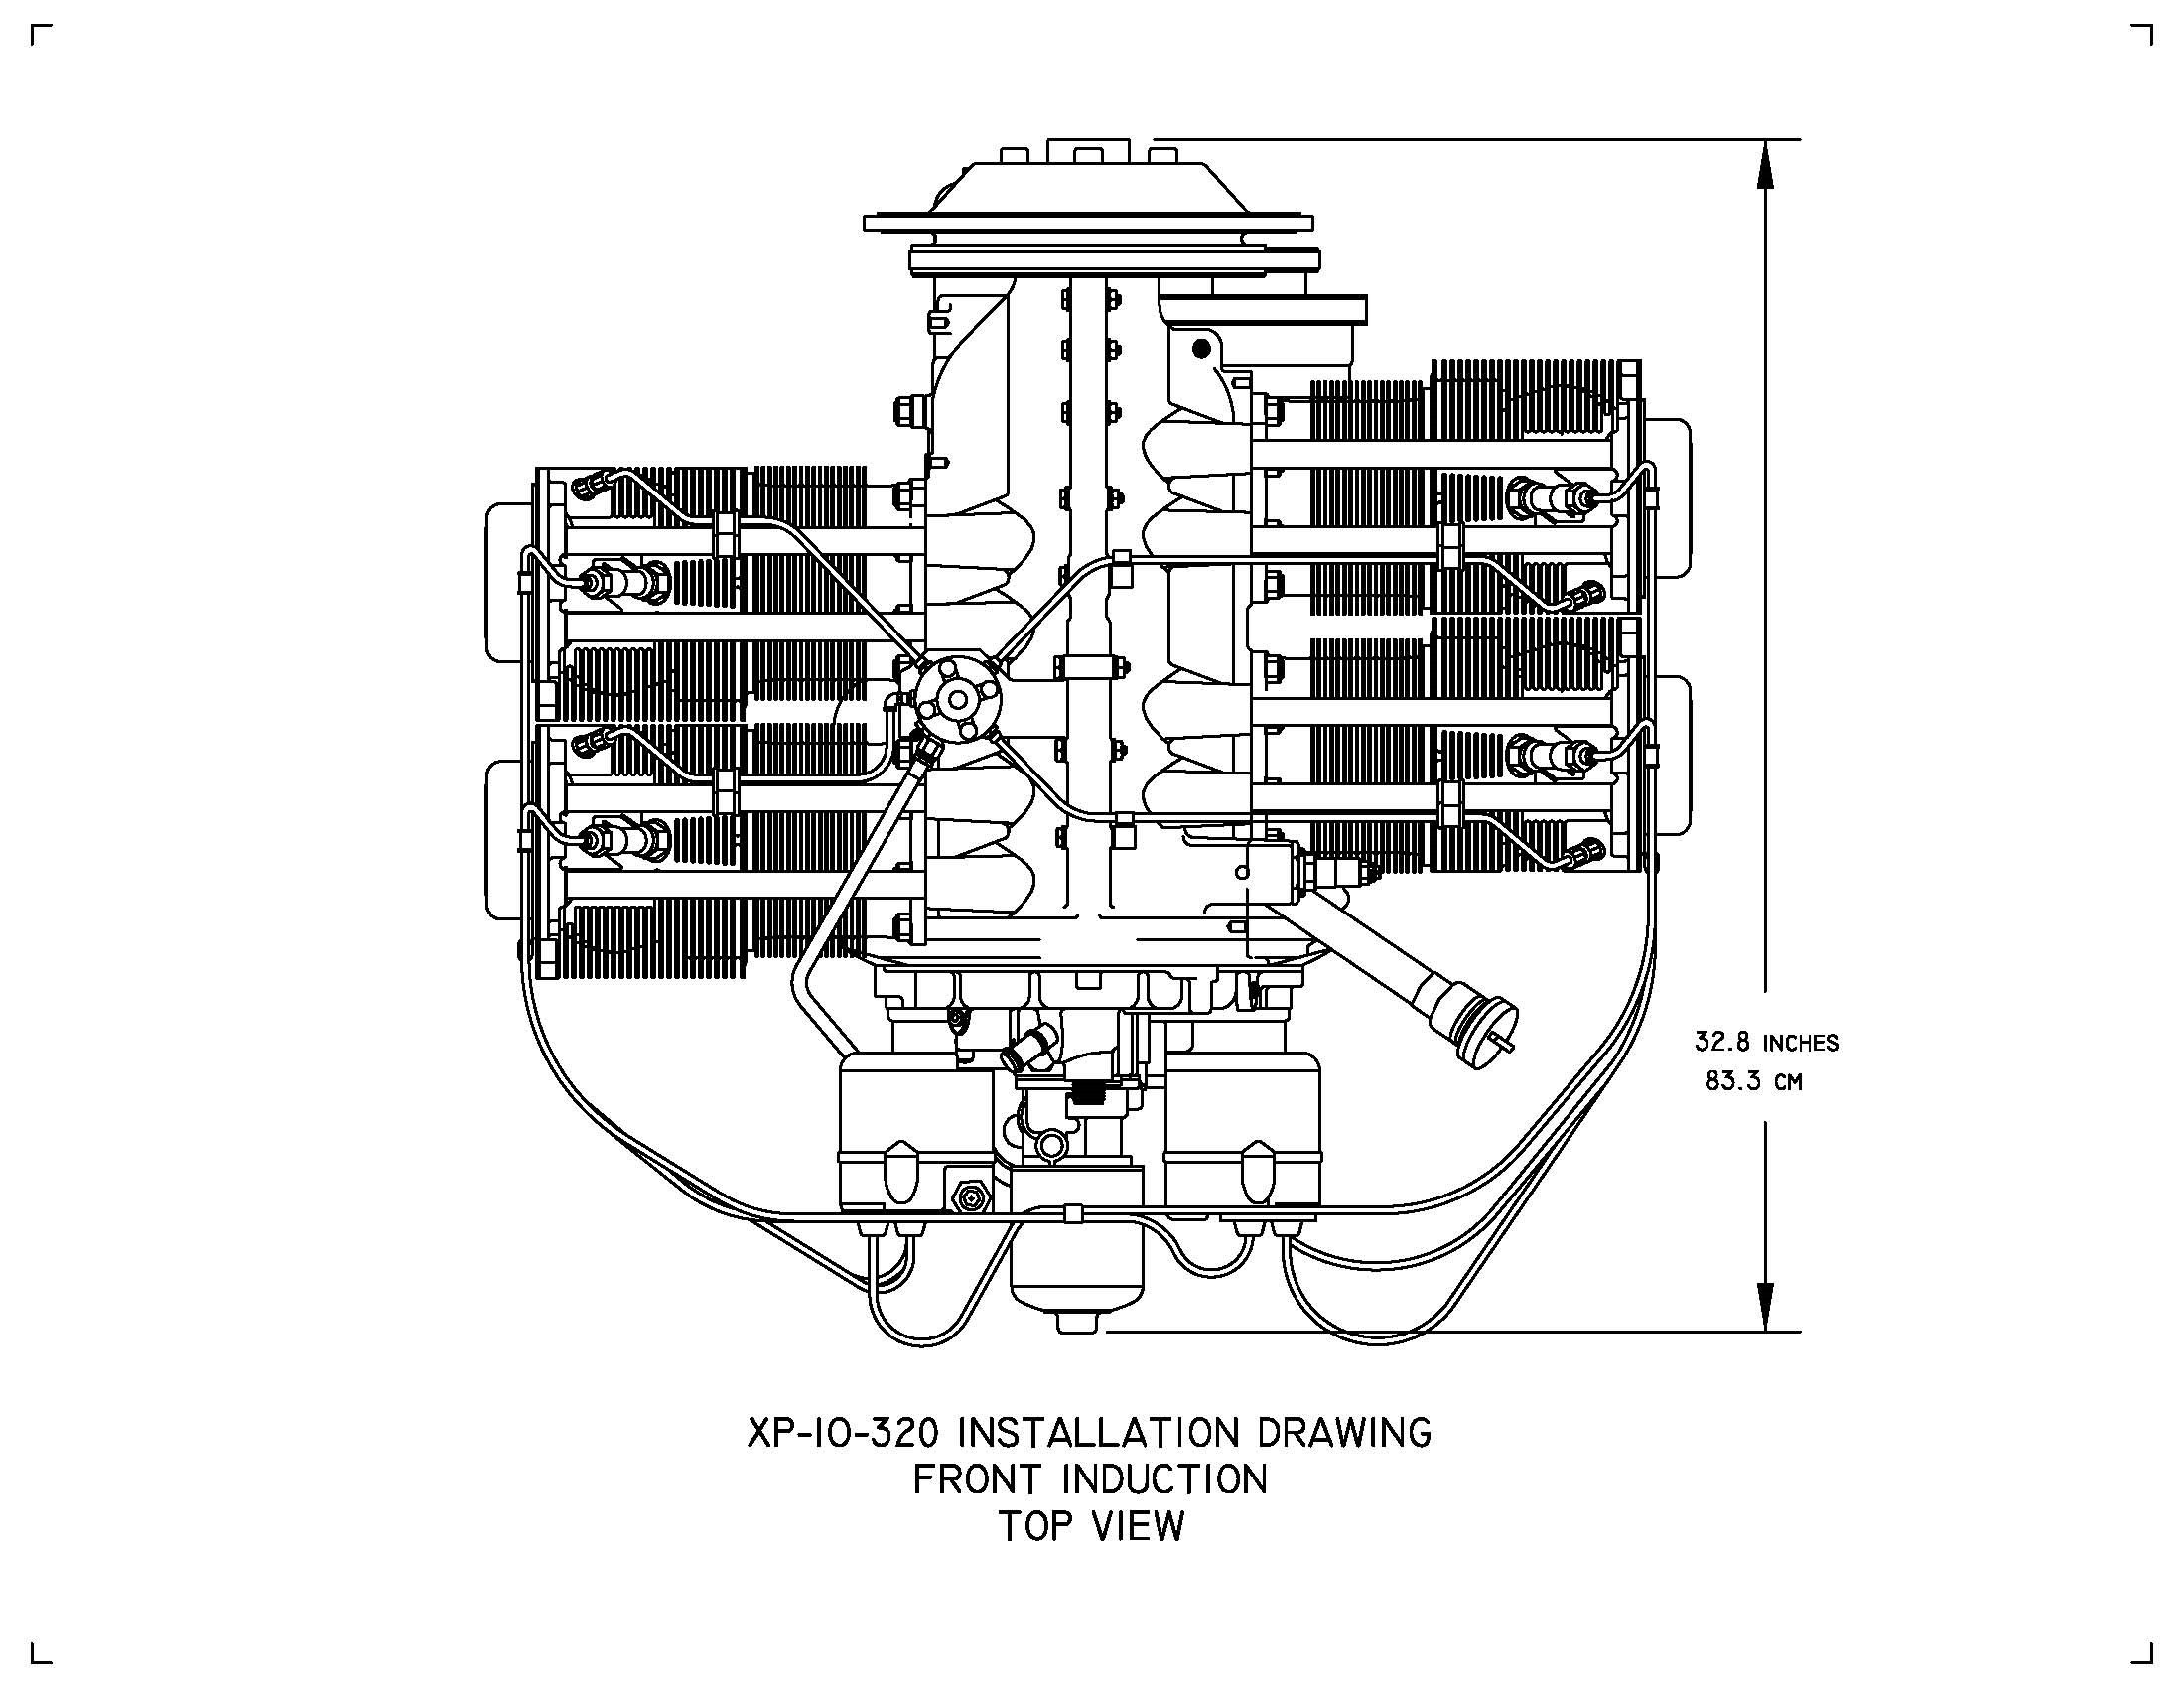 Lycoming Engine Diagram Superior Xp 320 Engine Spa Llc Of Lycoming Engine Diagram